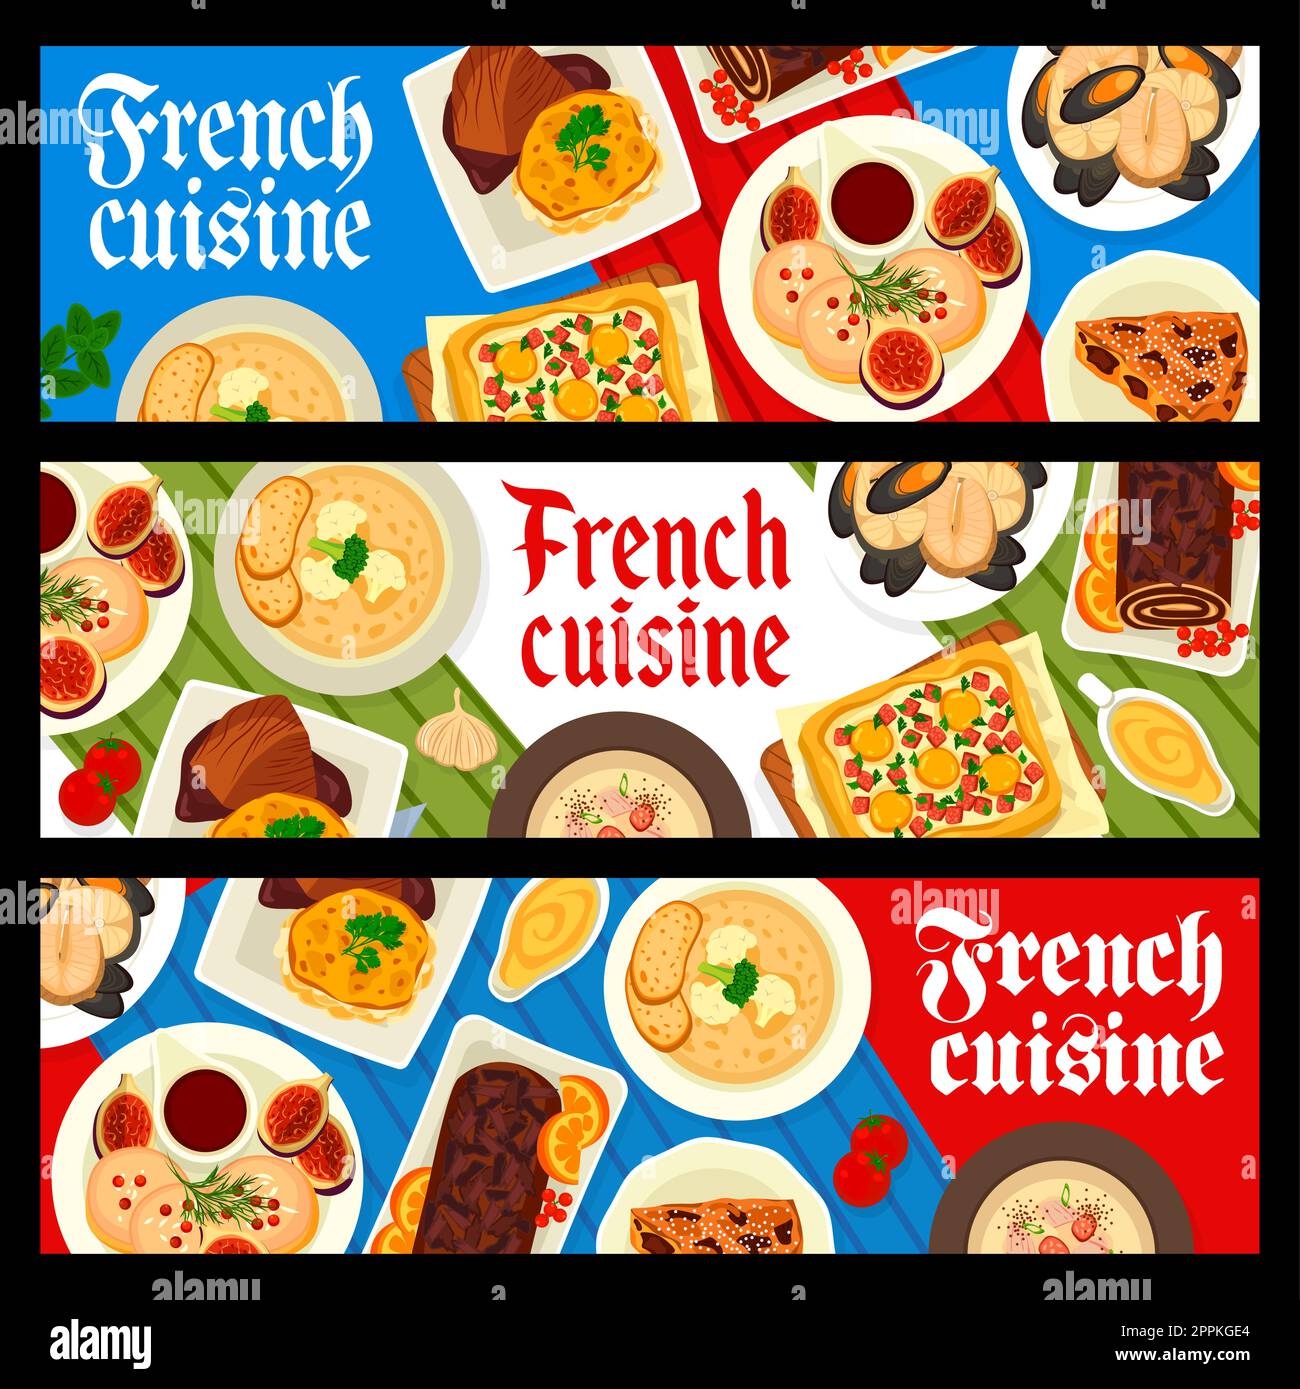 French cuisine banners, France gourmet food dishes for dinner and lunch, vector. French cuisine or Paris restaurant meals, stew and foie gras duck liv Stock Vector